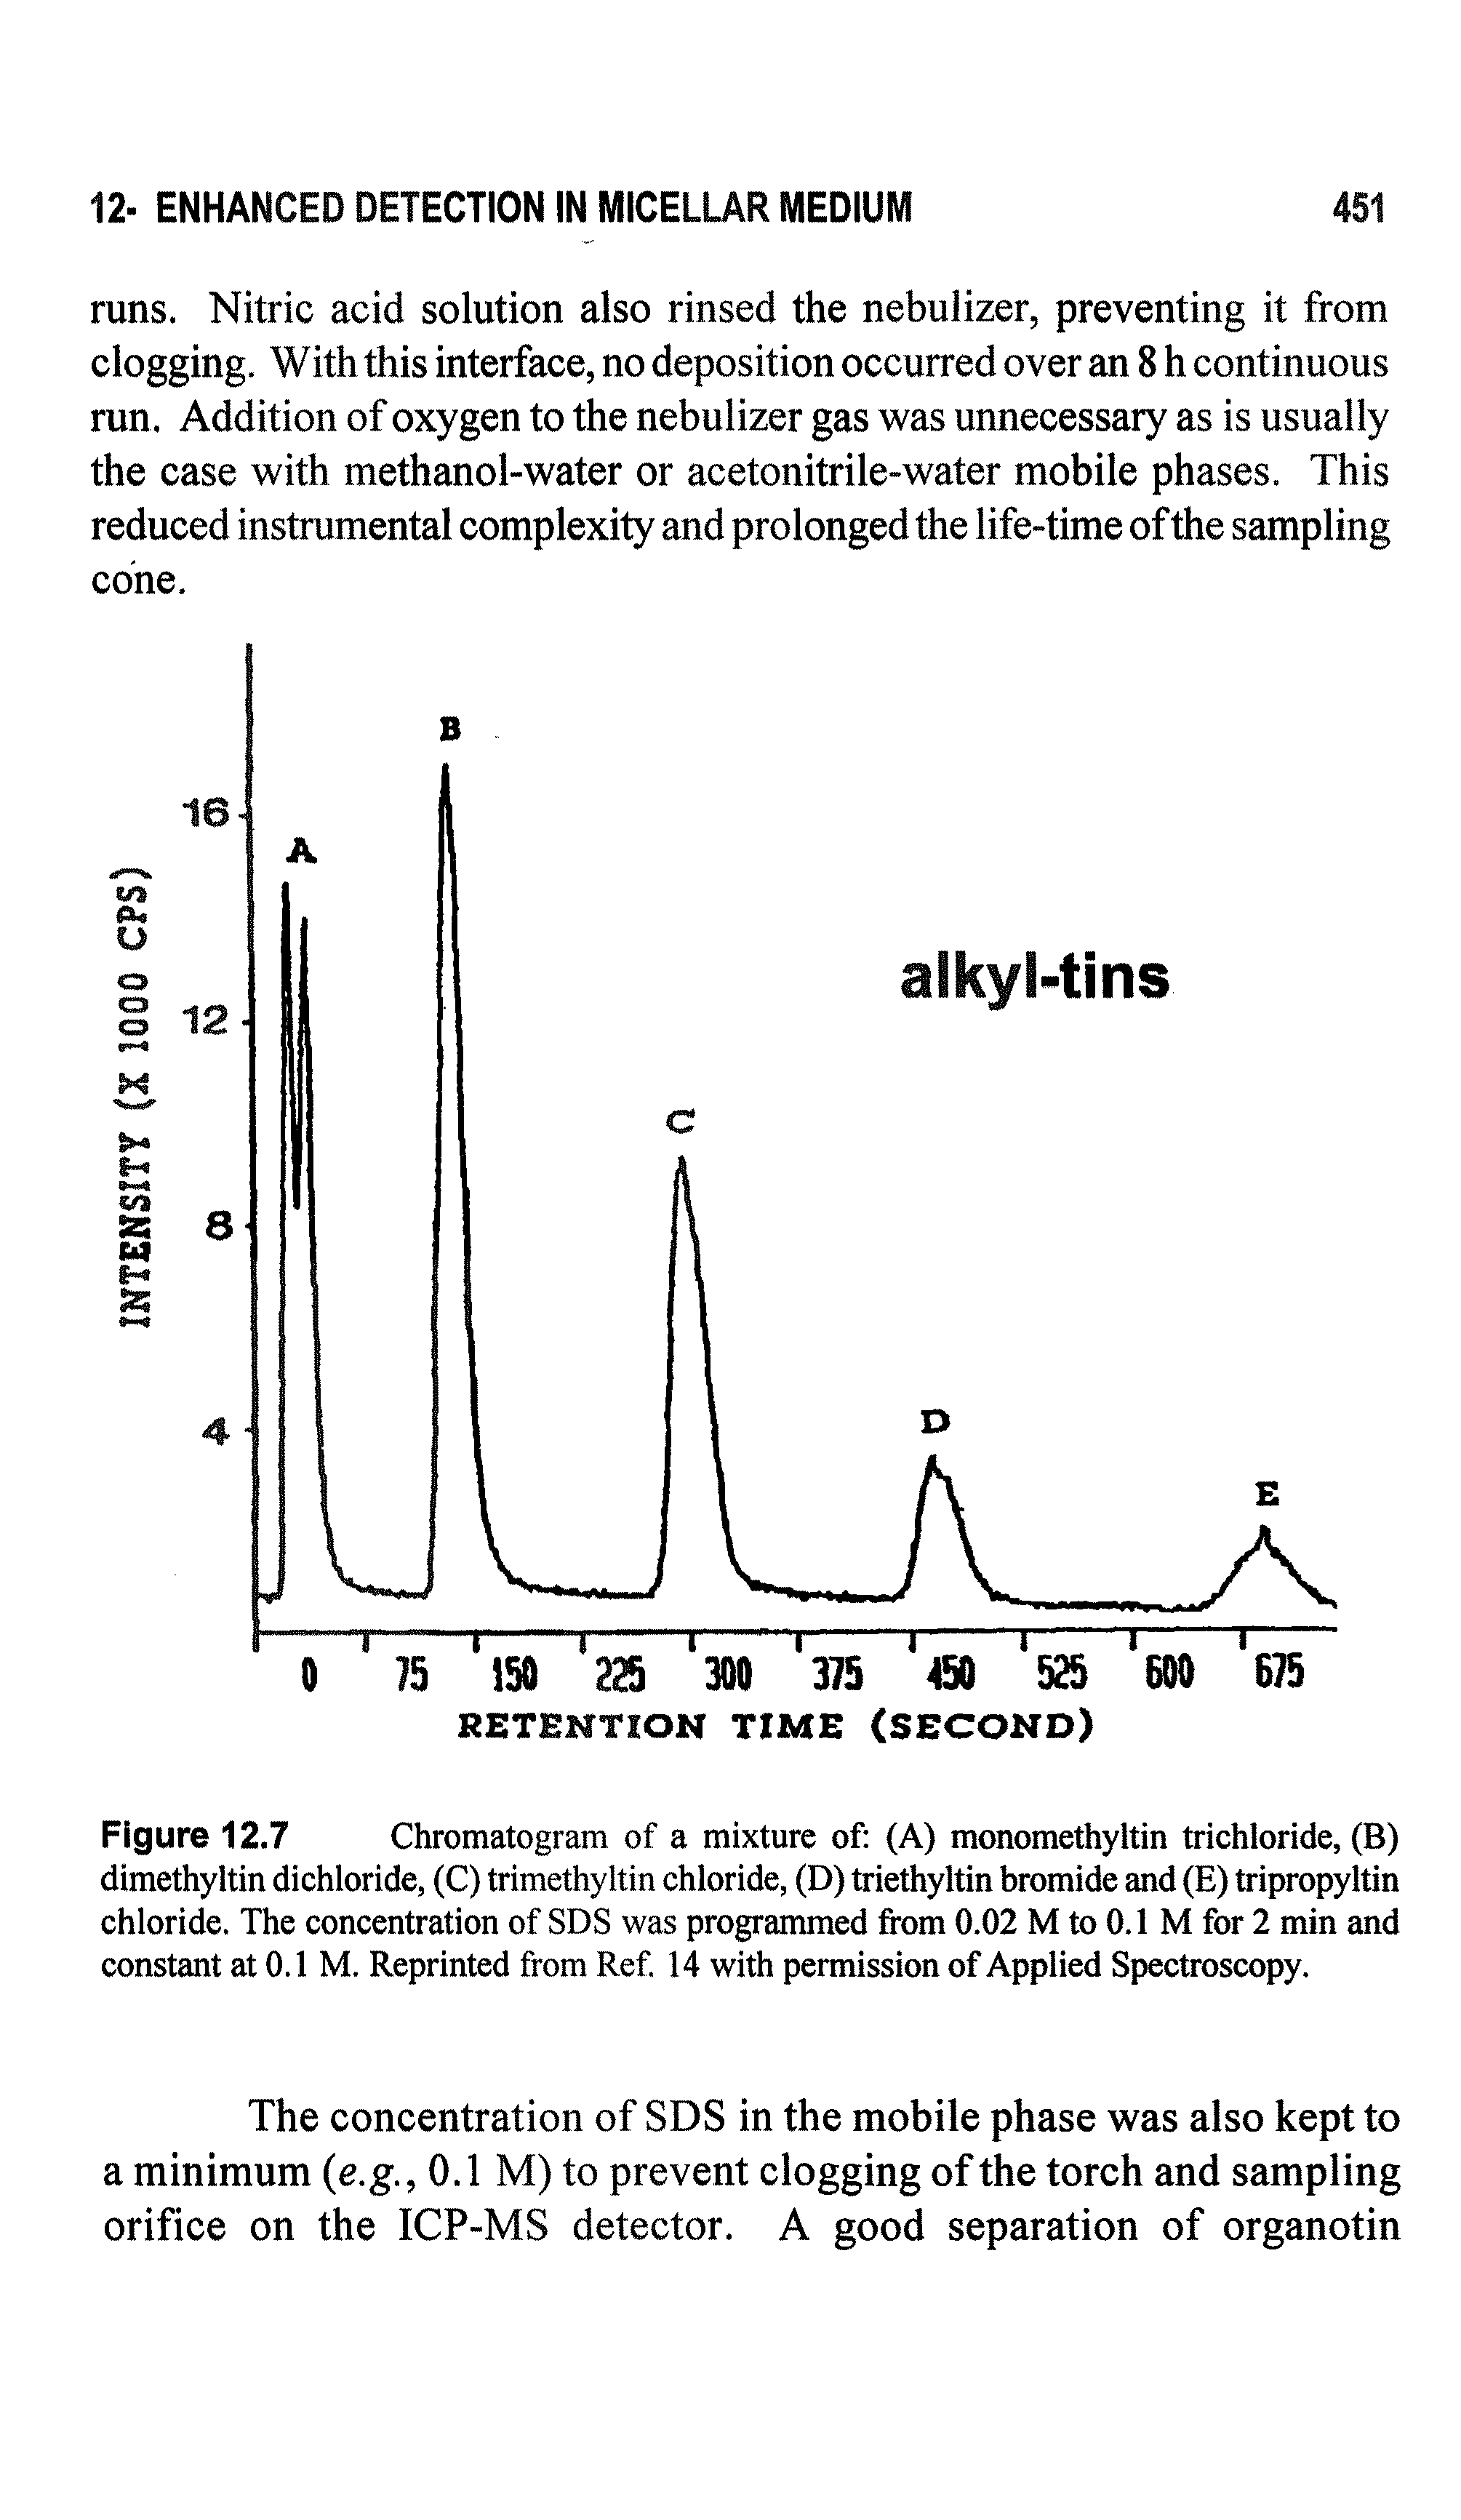 Figure 12.7 Chromatogram of a mixture of (A) monomethyltin trichloride, (B) dimethyltin dichloride, (C) trimethyltin chloride, (D) triethyltin bromide and (E) tripropyltin chloride. The concentration of SDS was programmed from 0.02 M to 0.1 M for 2 min and constant at 0.1 M. Reprinted from Ref. 14 with permission of Applied Sj ctroscopy.